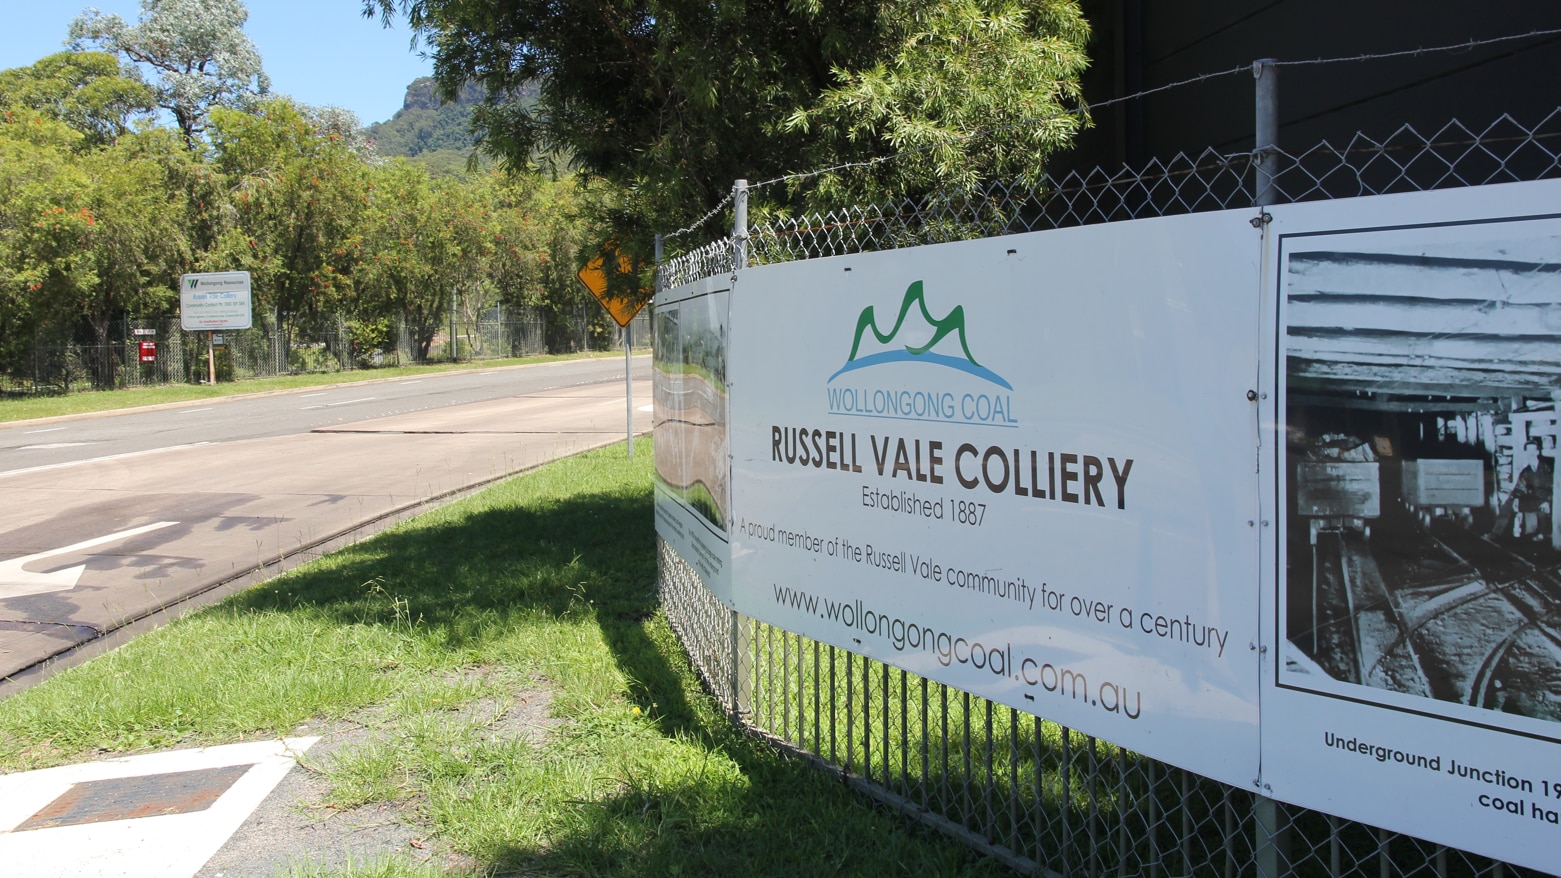 wollongong resources announces russell vale colliery to close with 100 workers impacted